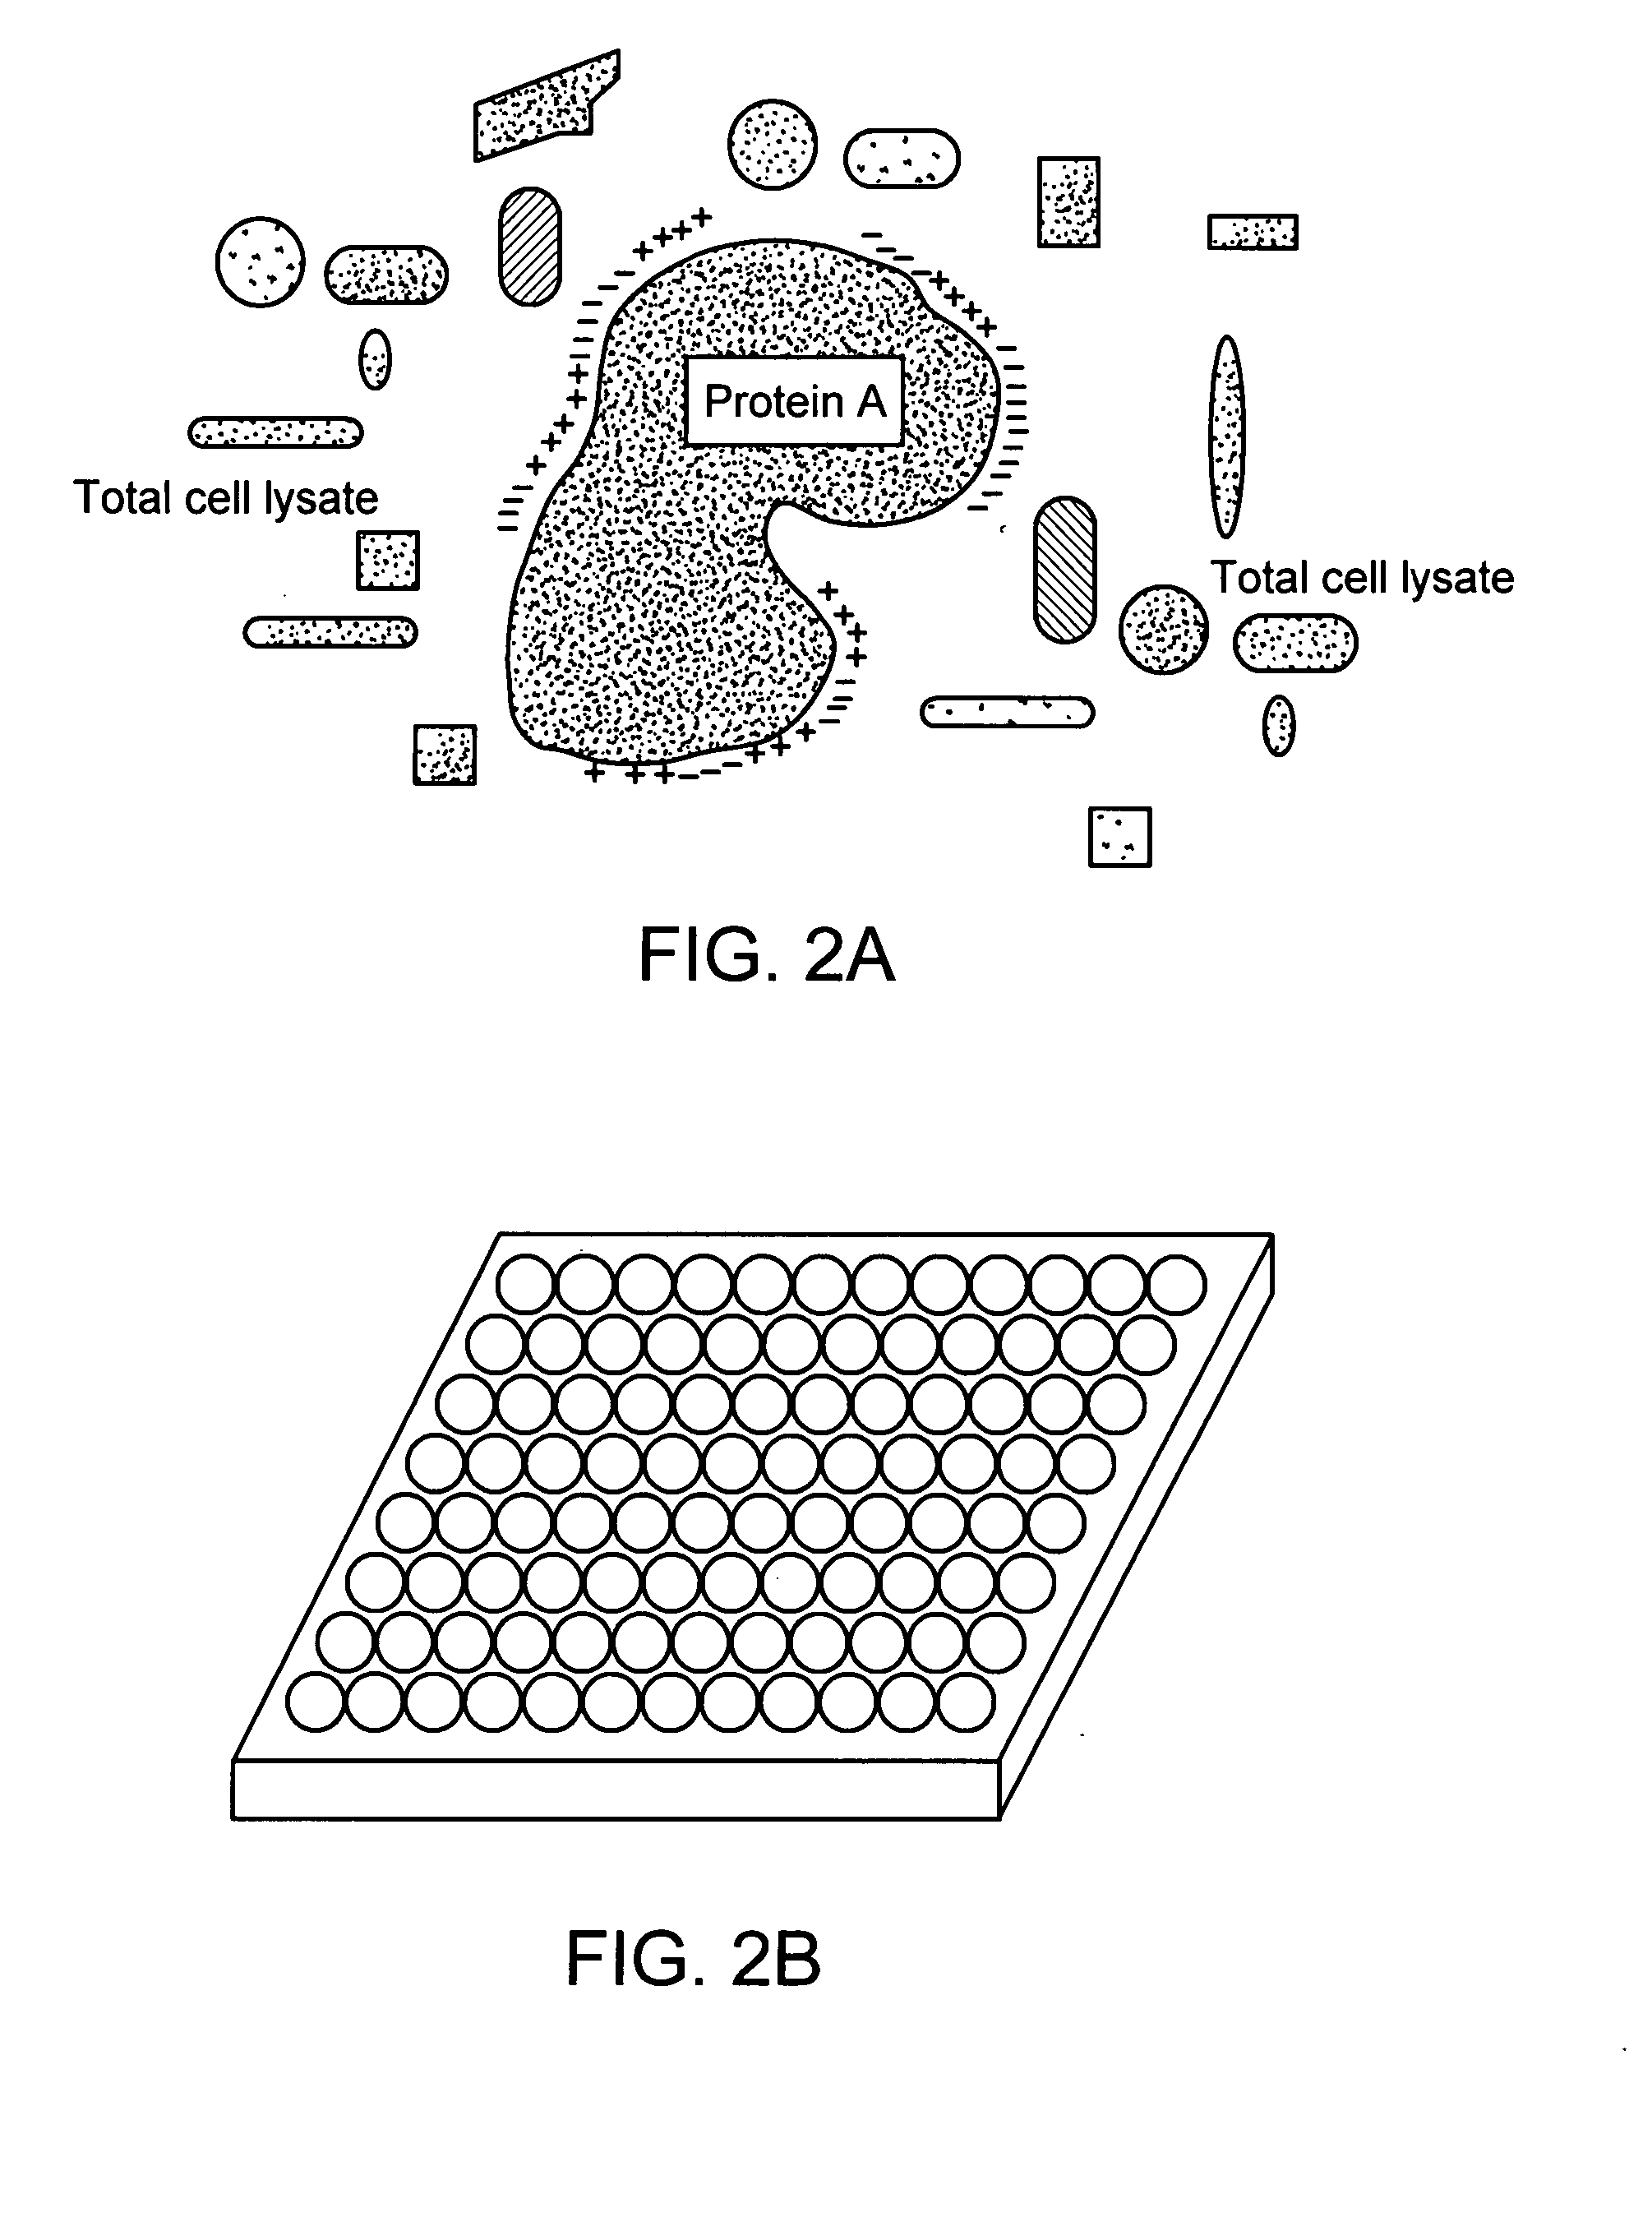 Protein-protein interactions and methods for identifying interacting proteins and the amino acid sequence at the site of interaction